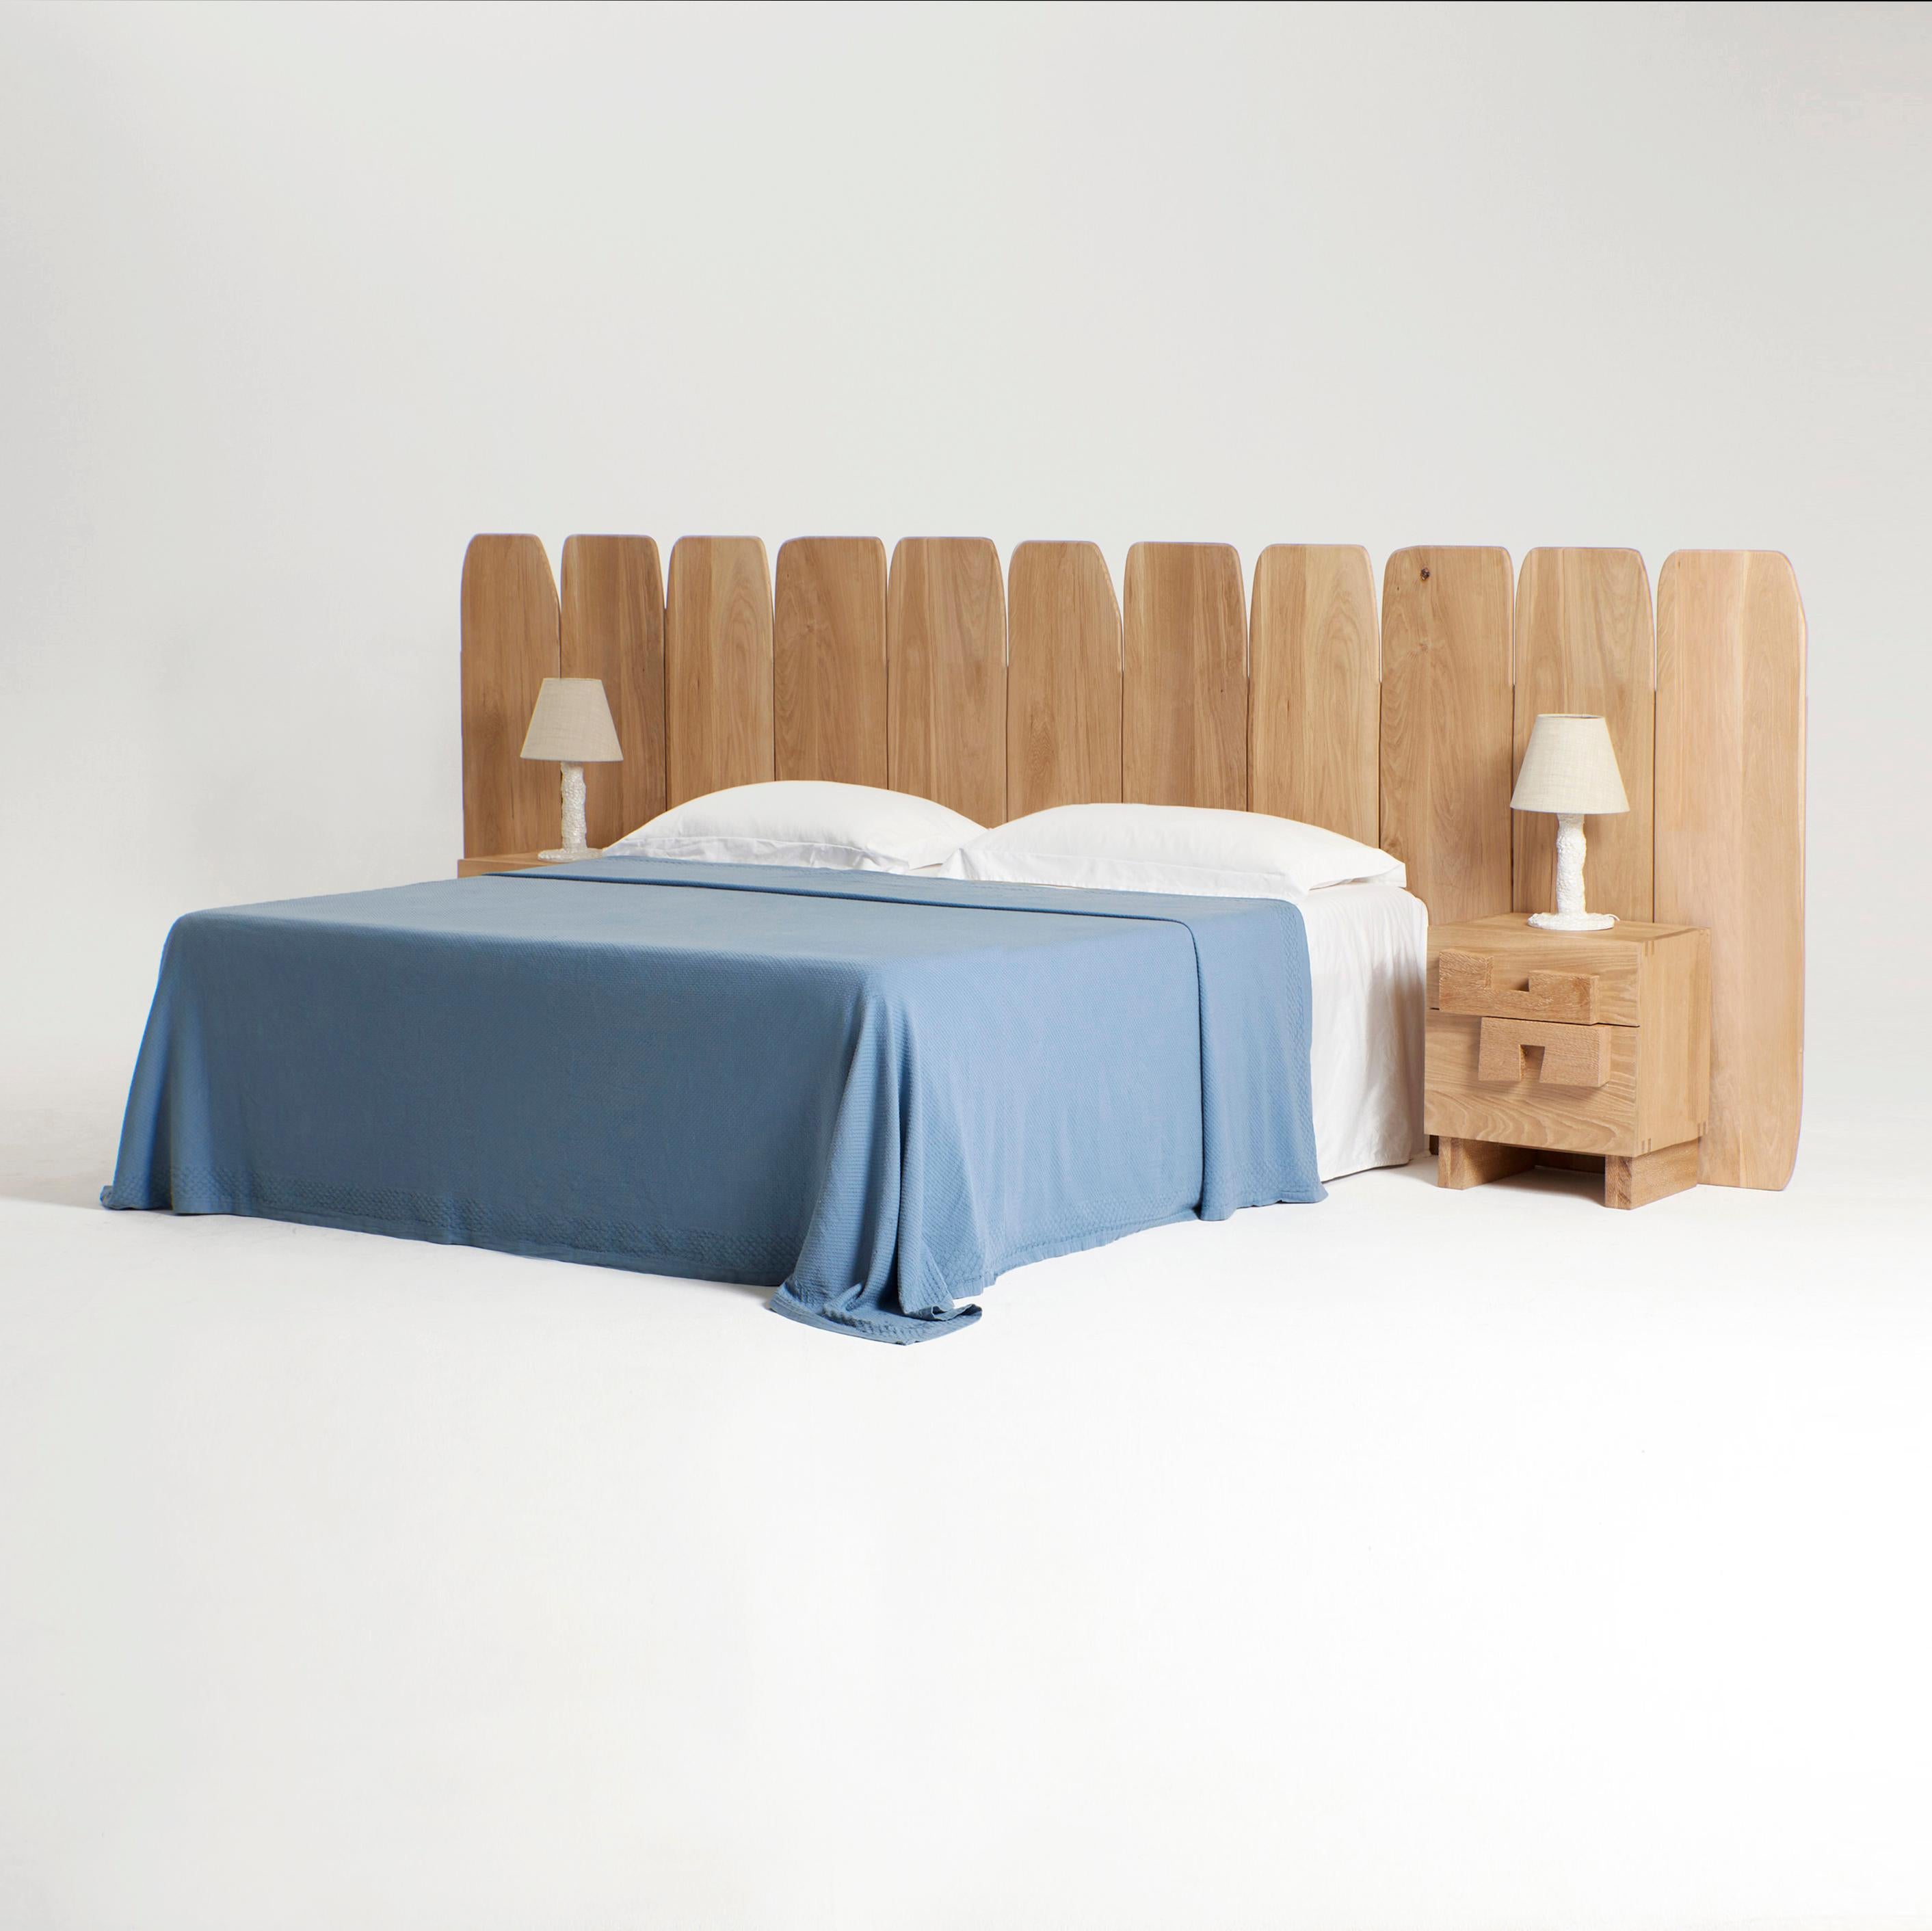 Madeira Headboard Large
Designed by Project 213A in 2023

Finest oak wood panels made alined and wall-mounted to fit behind a kingsize bed..

Bespoke dimensions upon request, also available in oak and walnut.
Handmade in Portugal. 
Production lead